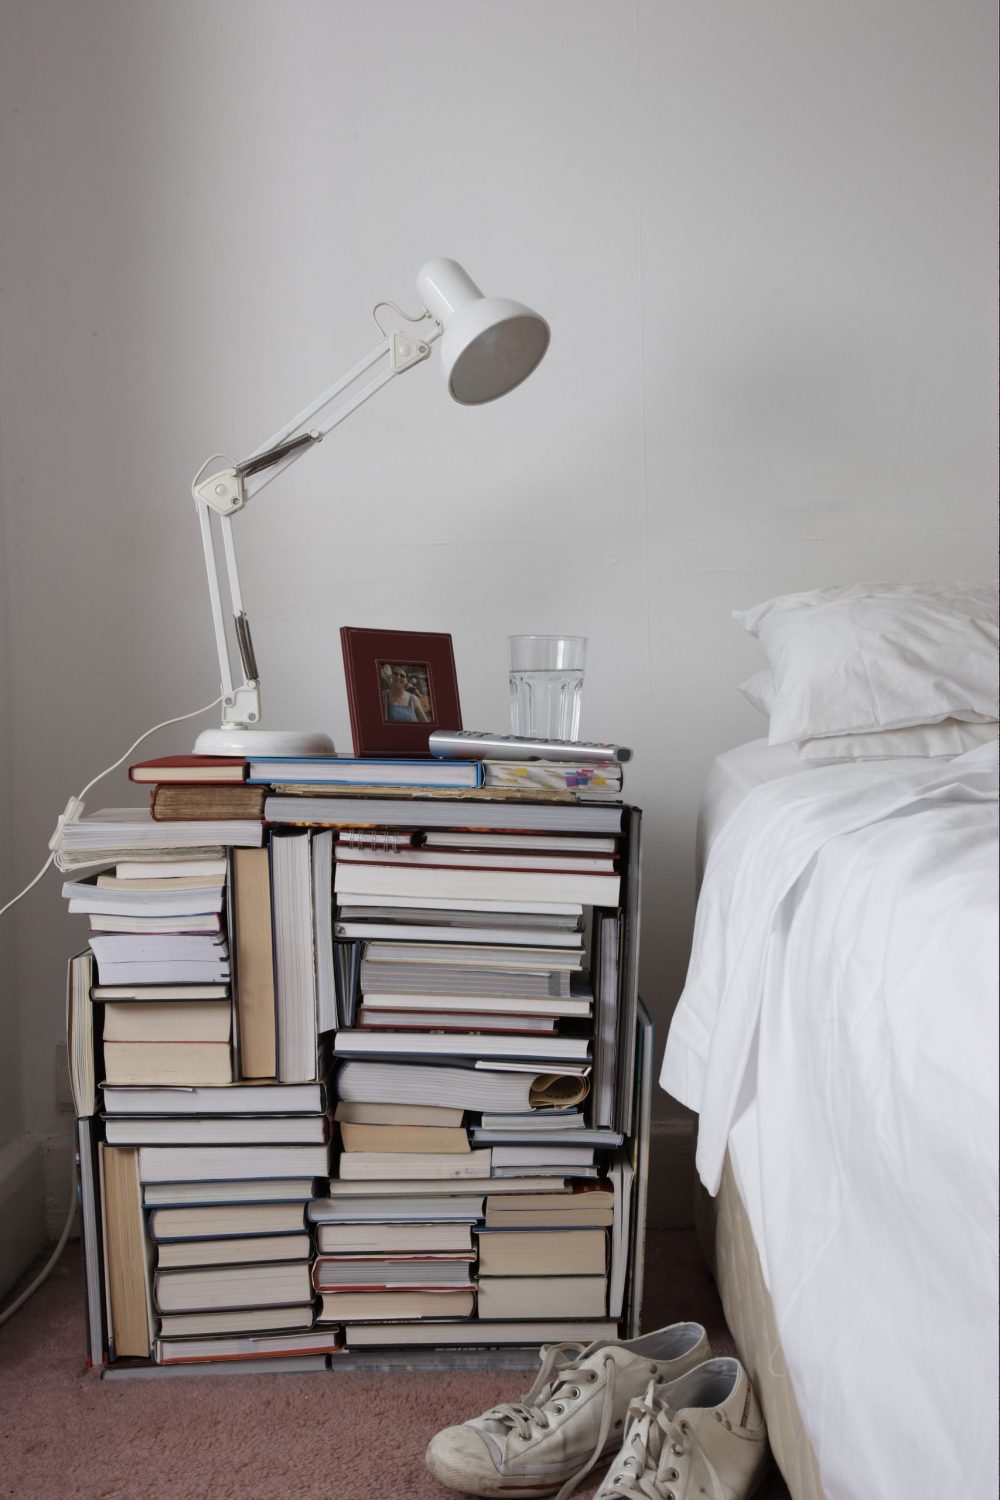 Books of various sizes are stacked together to create a makeshift nightstand.